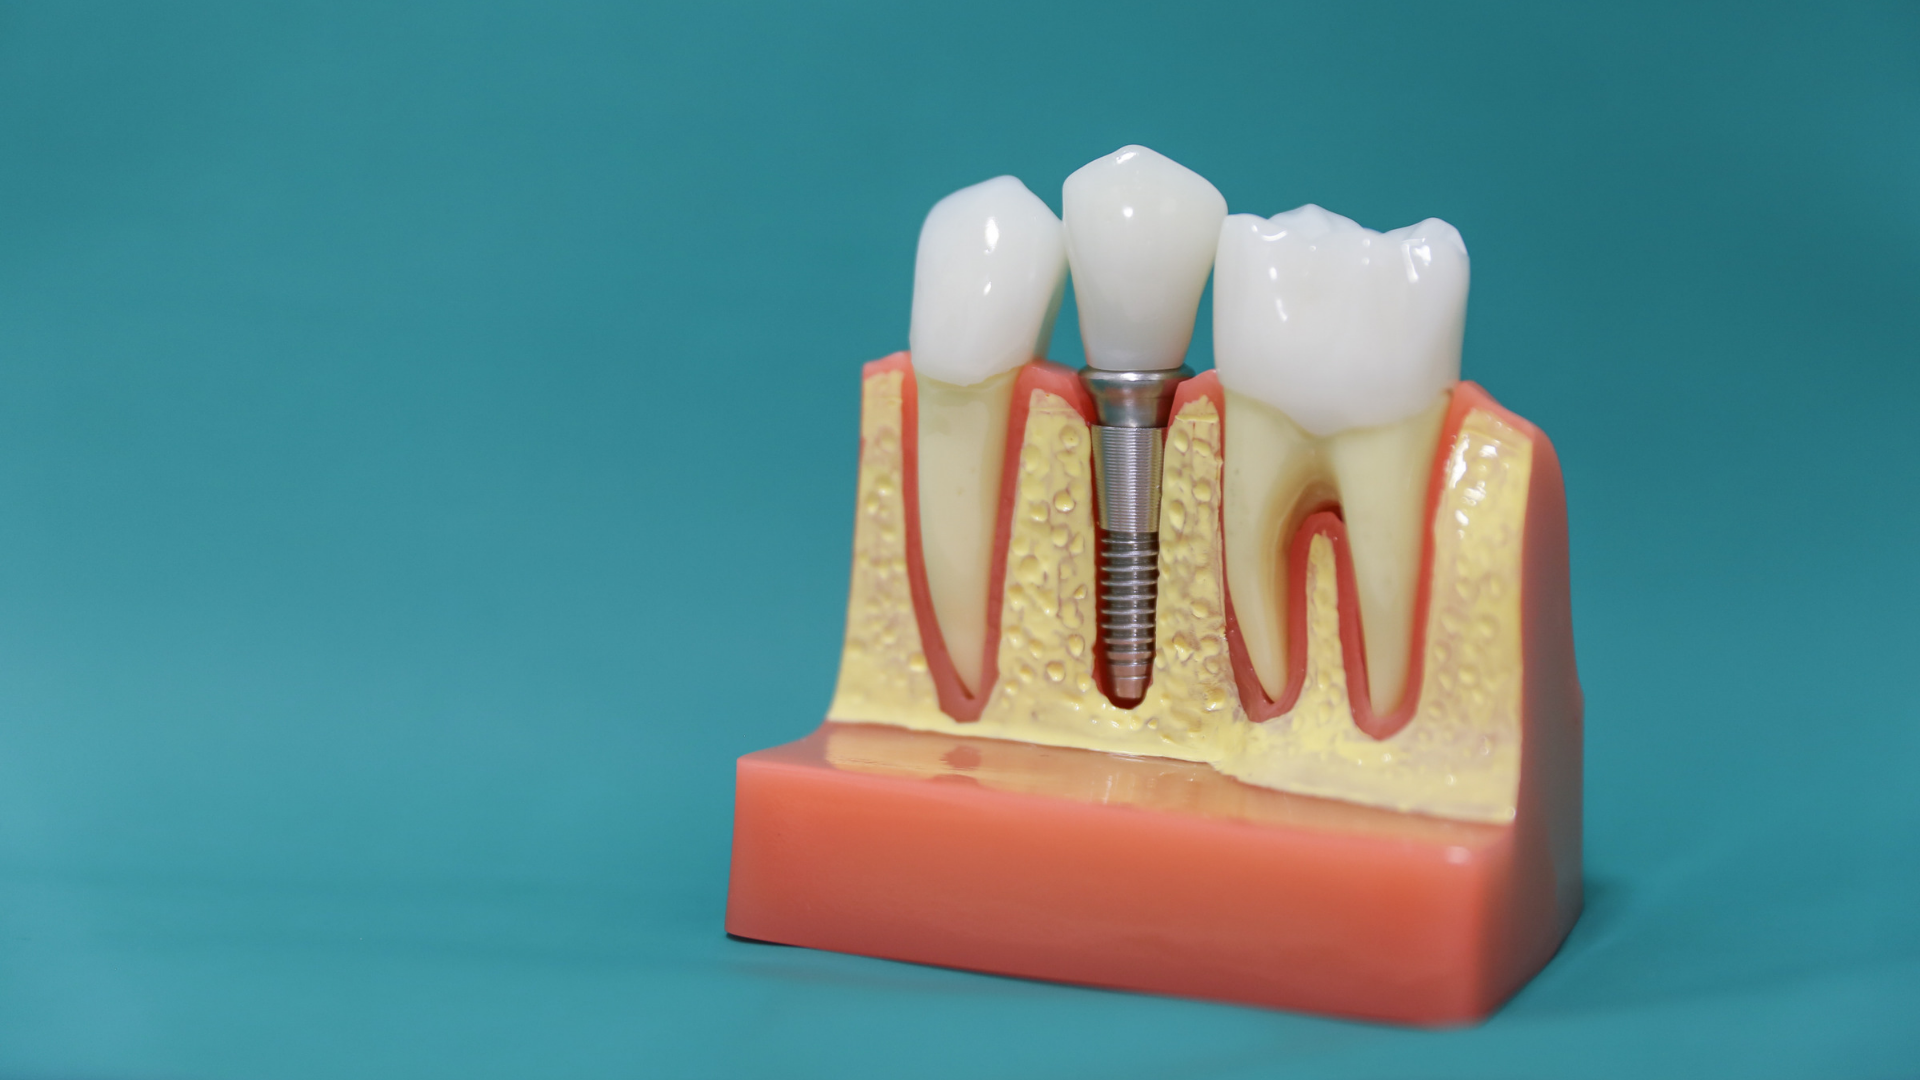 Mini Dental Implants-In which cases are they used and what are their advantages & disadvantages